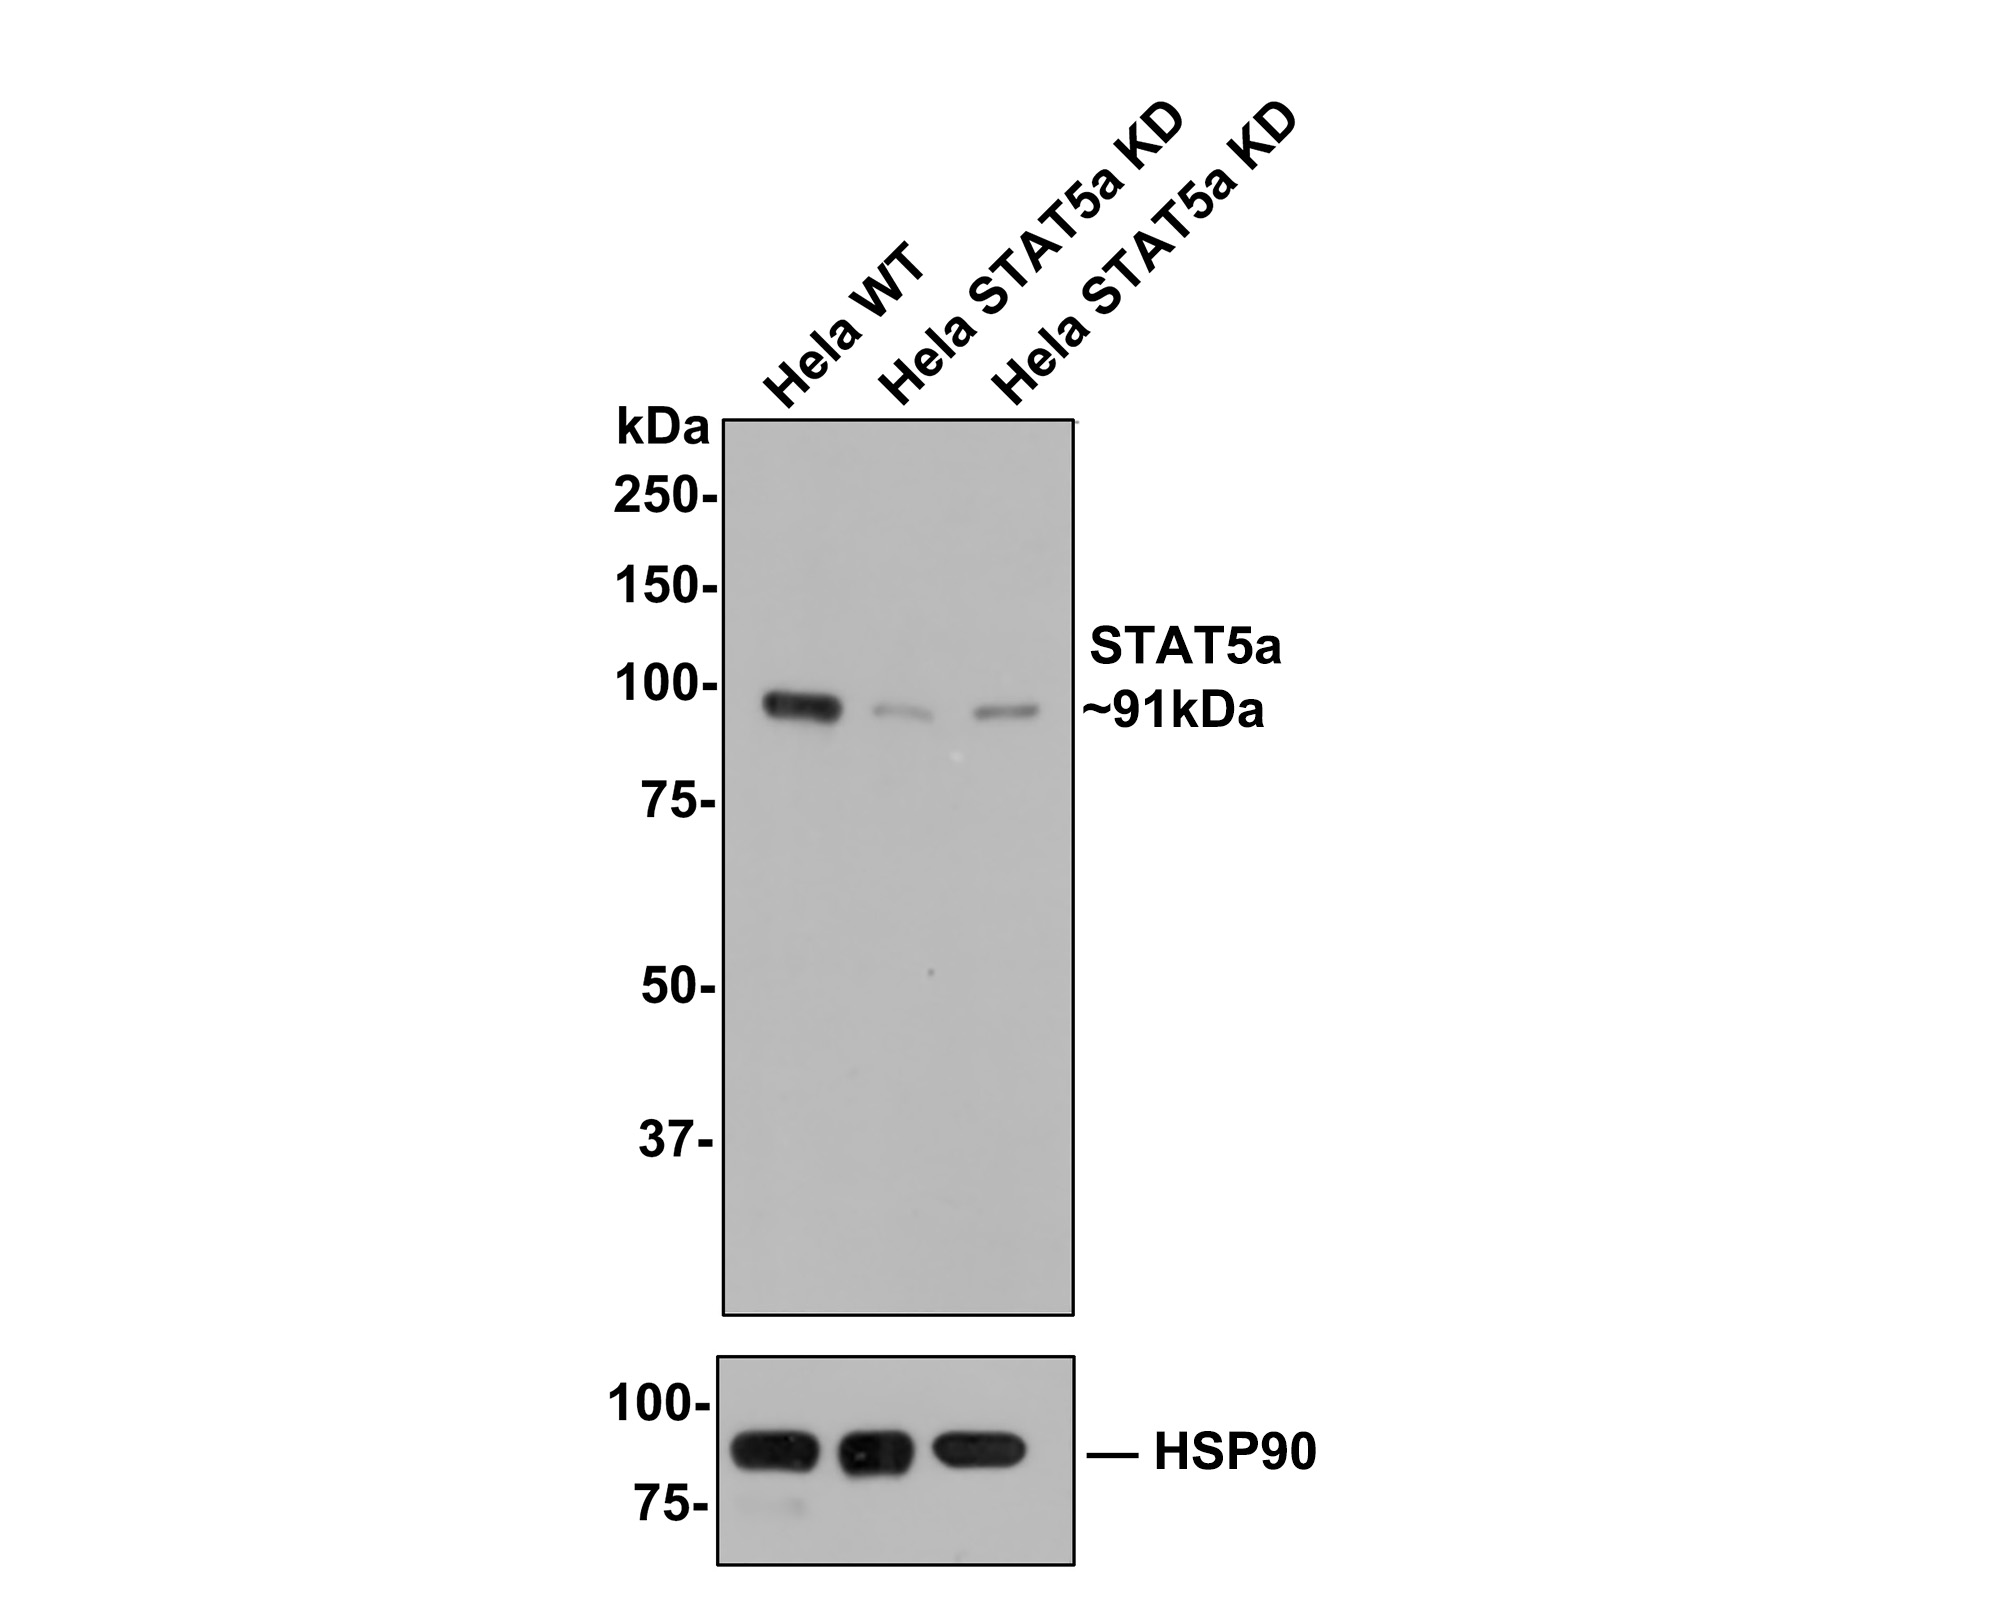 Western blot analysis of STAT5a on different lysates. Proteins were transferred to a PVDF membrane and blocked with 5% BSA in PBS for 1 hour at room temperature. The primary antibody (ET1610-58, 1/500) was used in 5% BSA at room temperature for 2 hours. Goat Anti-Rabbit IgG - HRP Secondary Antibody (HA1001) at 1:5,000 dilution was used for 1 hour at room temperature.<br />
Positive control: <br />
Lane 1: Hela cell lysate<br />
Lane 2: K562 cell lysate